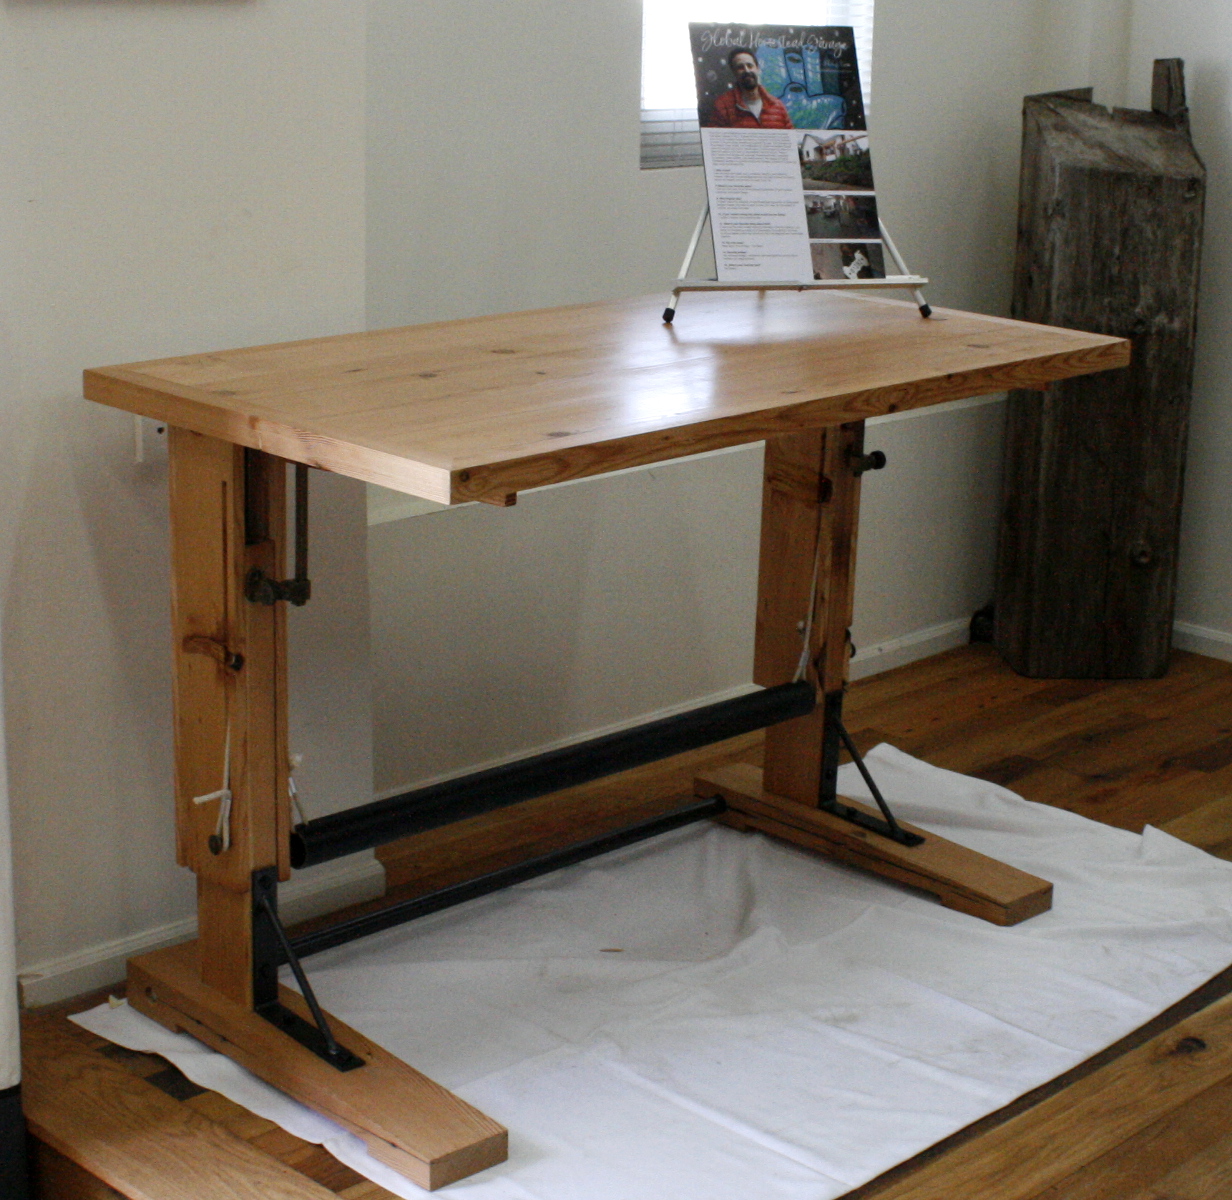 Antique Heart Pine was giving new life as a sash table created by Global Homestead Garage for Pioneer Millworks.